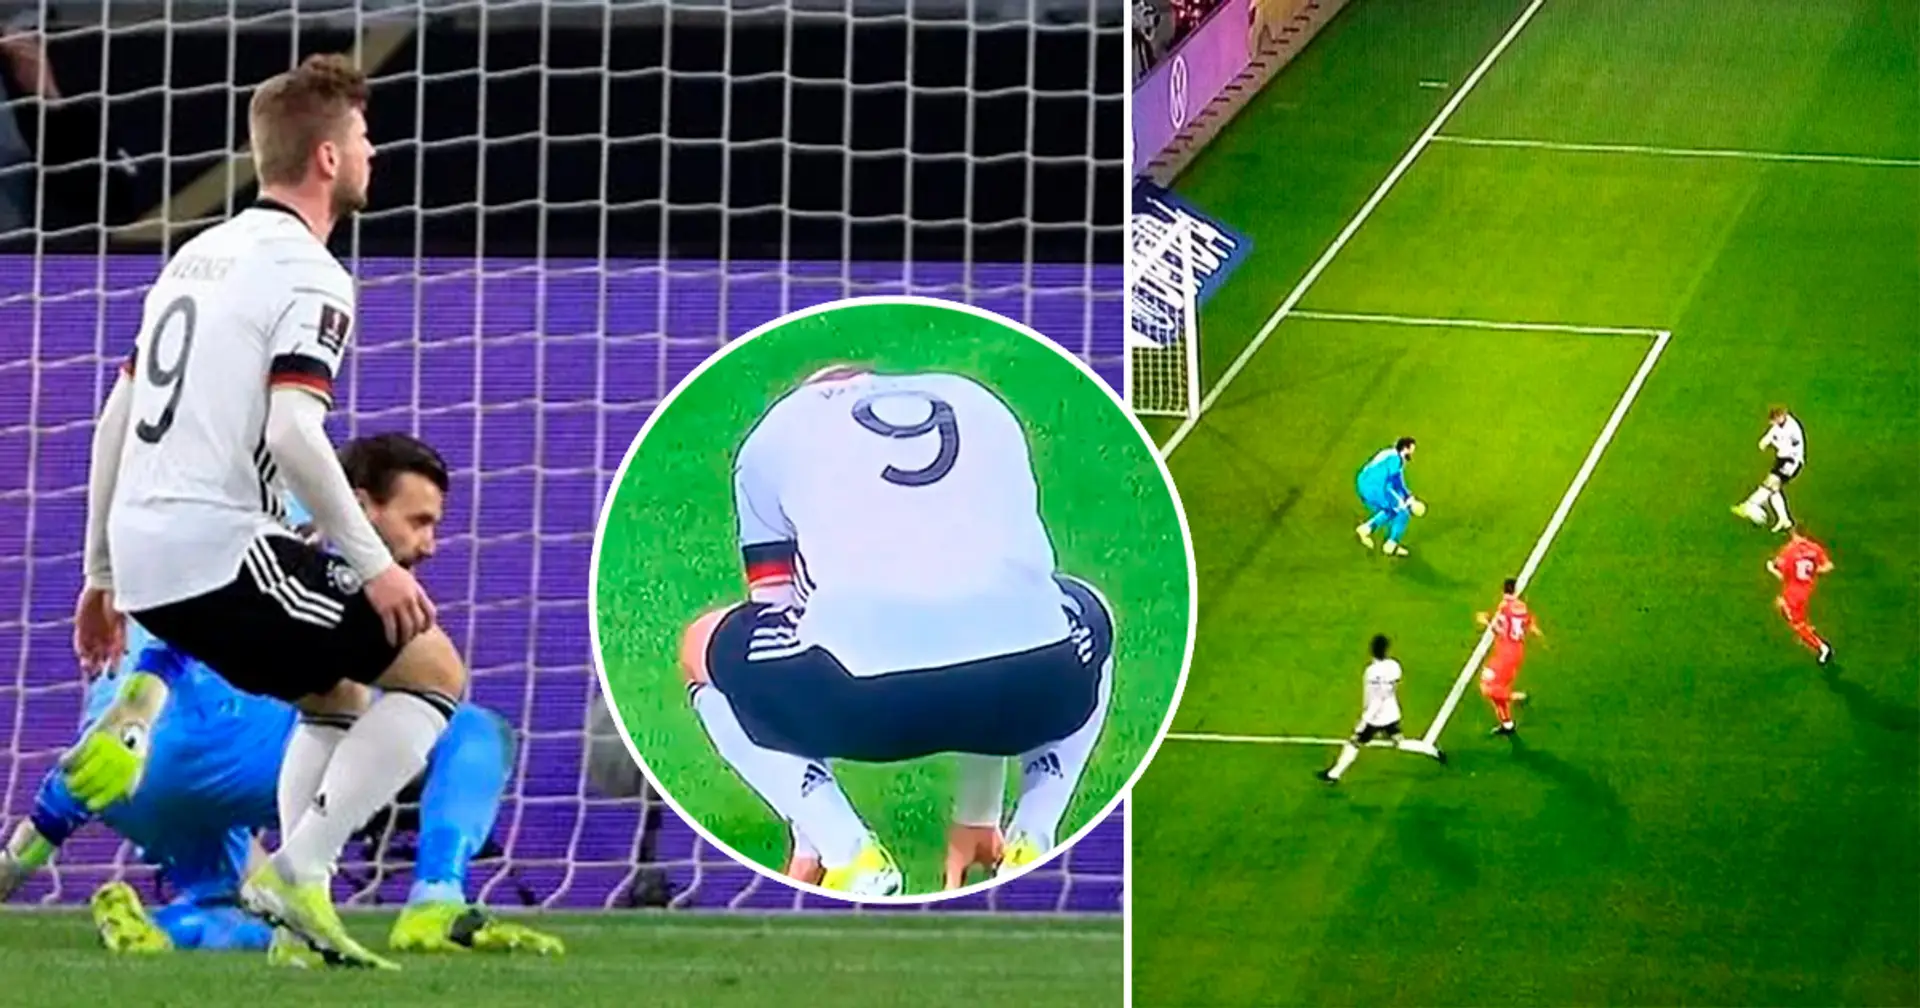 'He is doing it on purpose for the memes': Timo Werner misses a sitter as Germany lose to North Macedonia